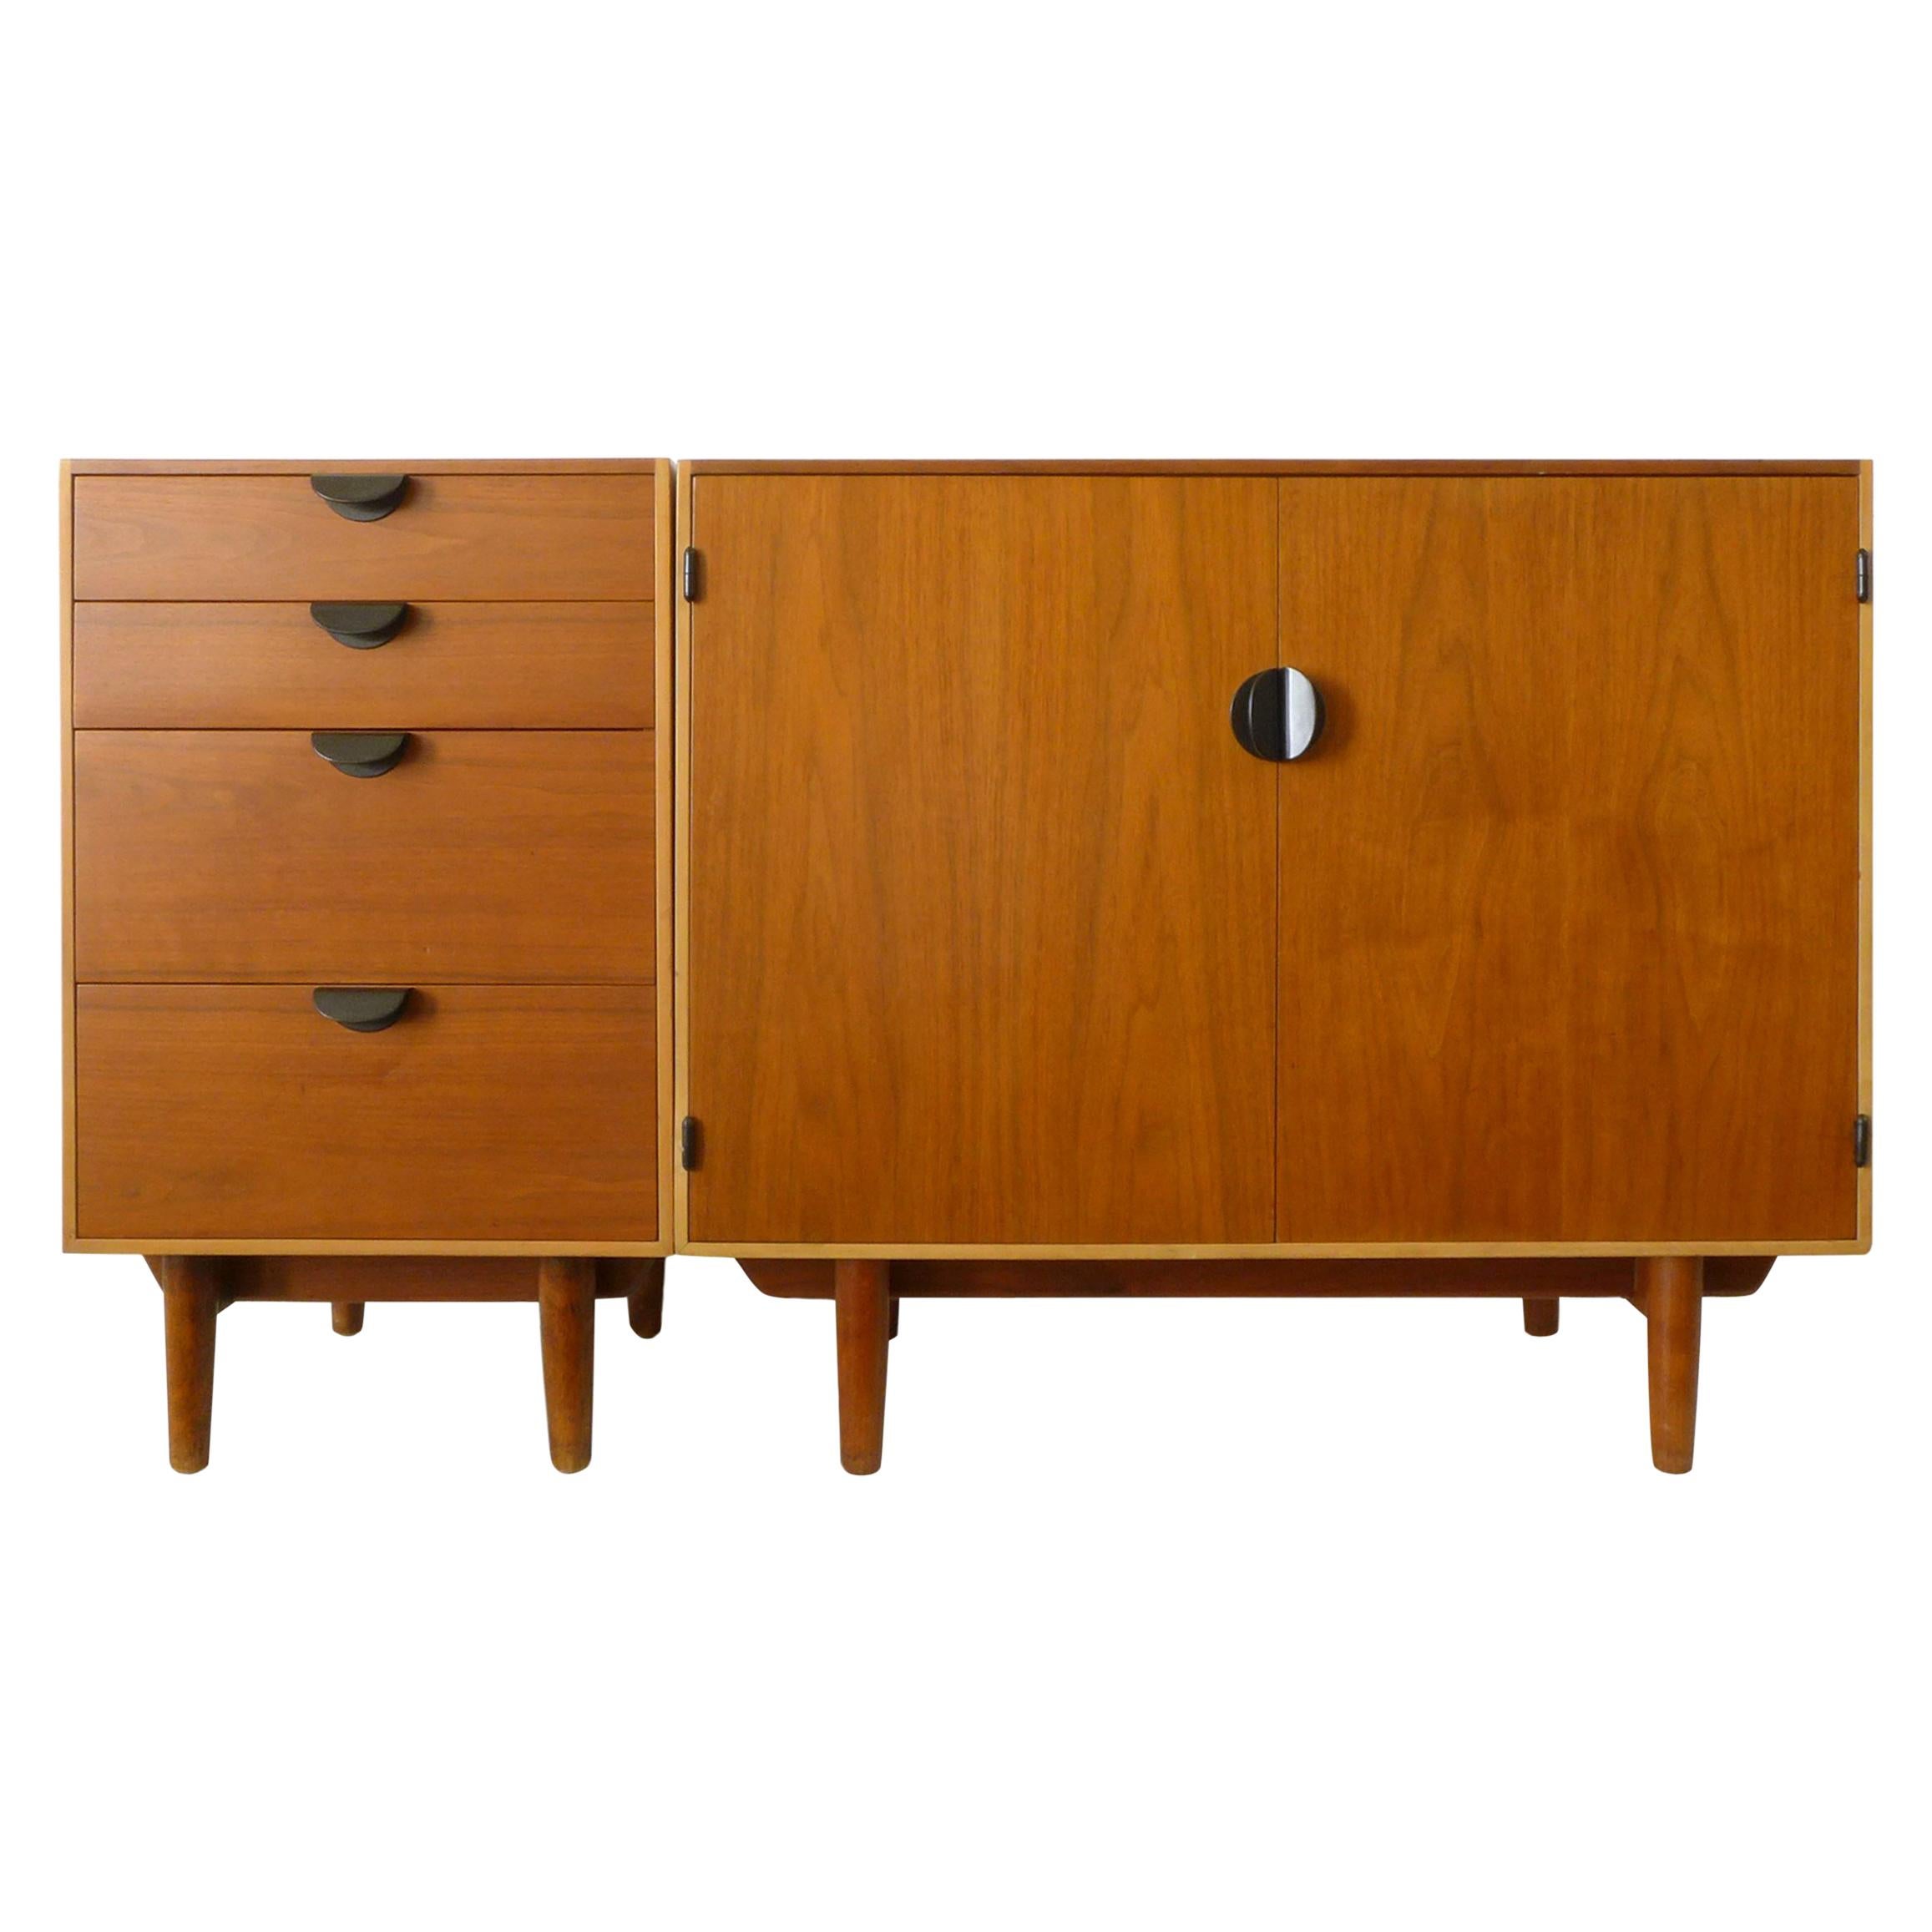 Pair of Midcentury Cabinets by Finn Juhl for Baker For Sale